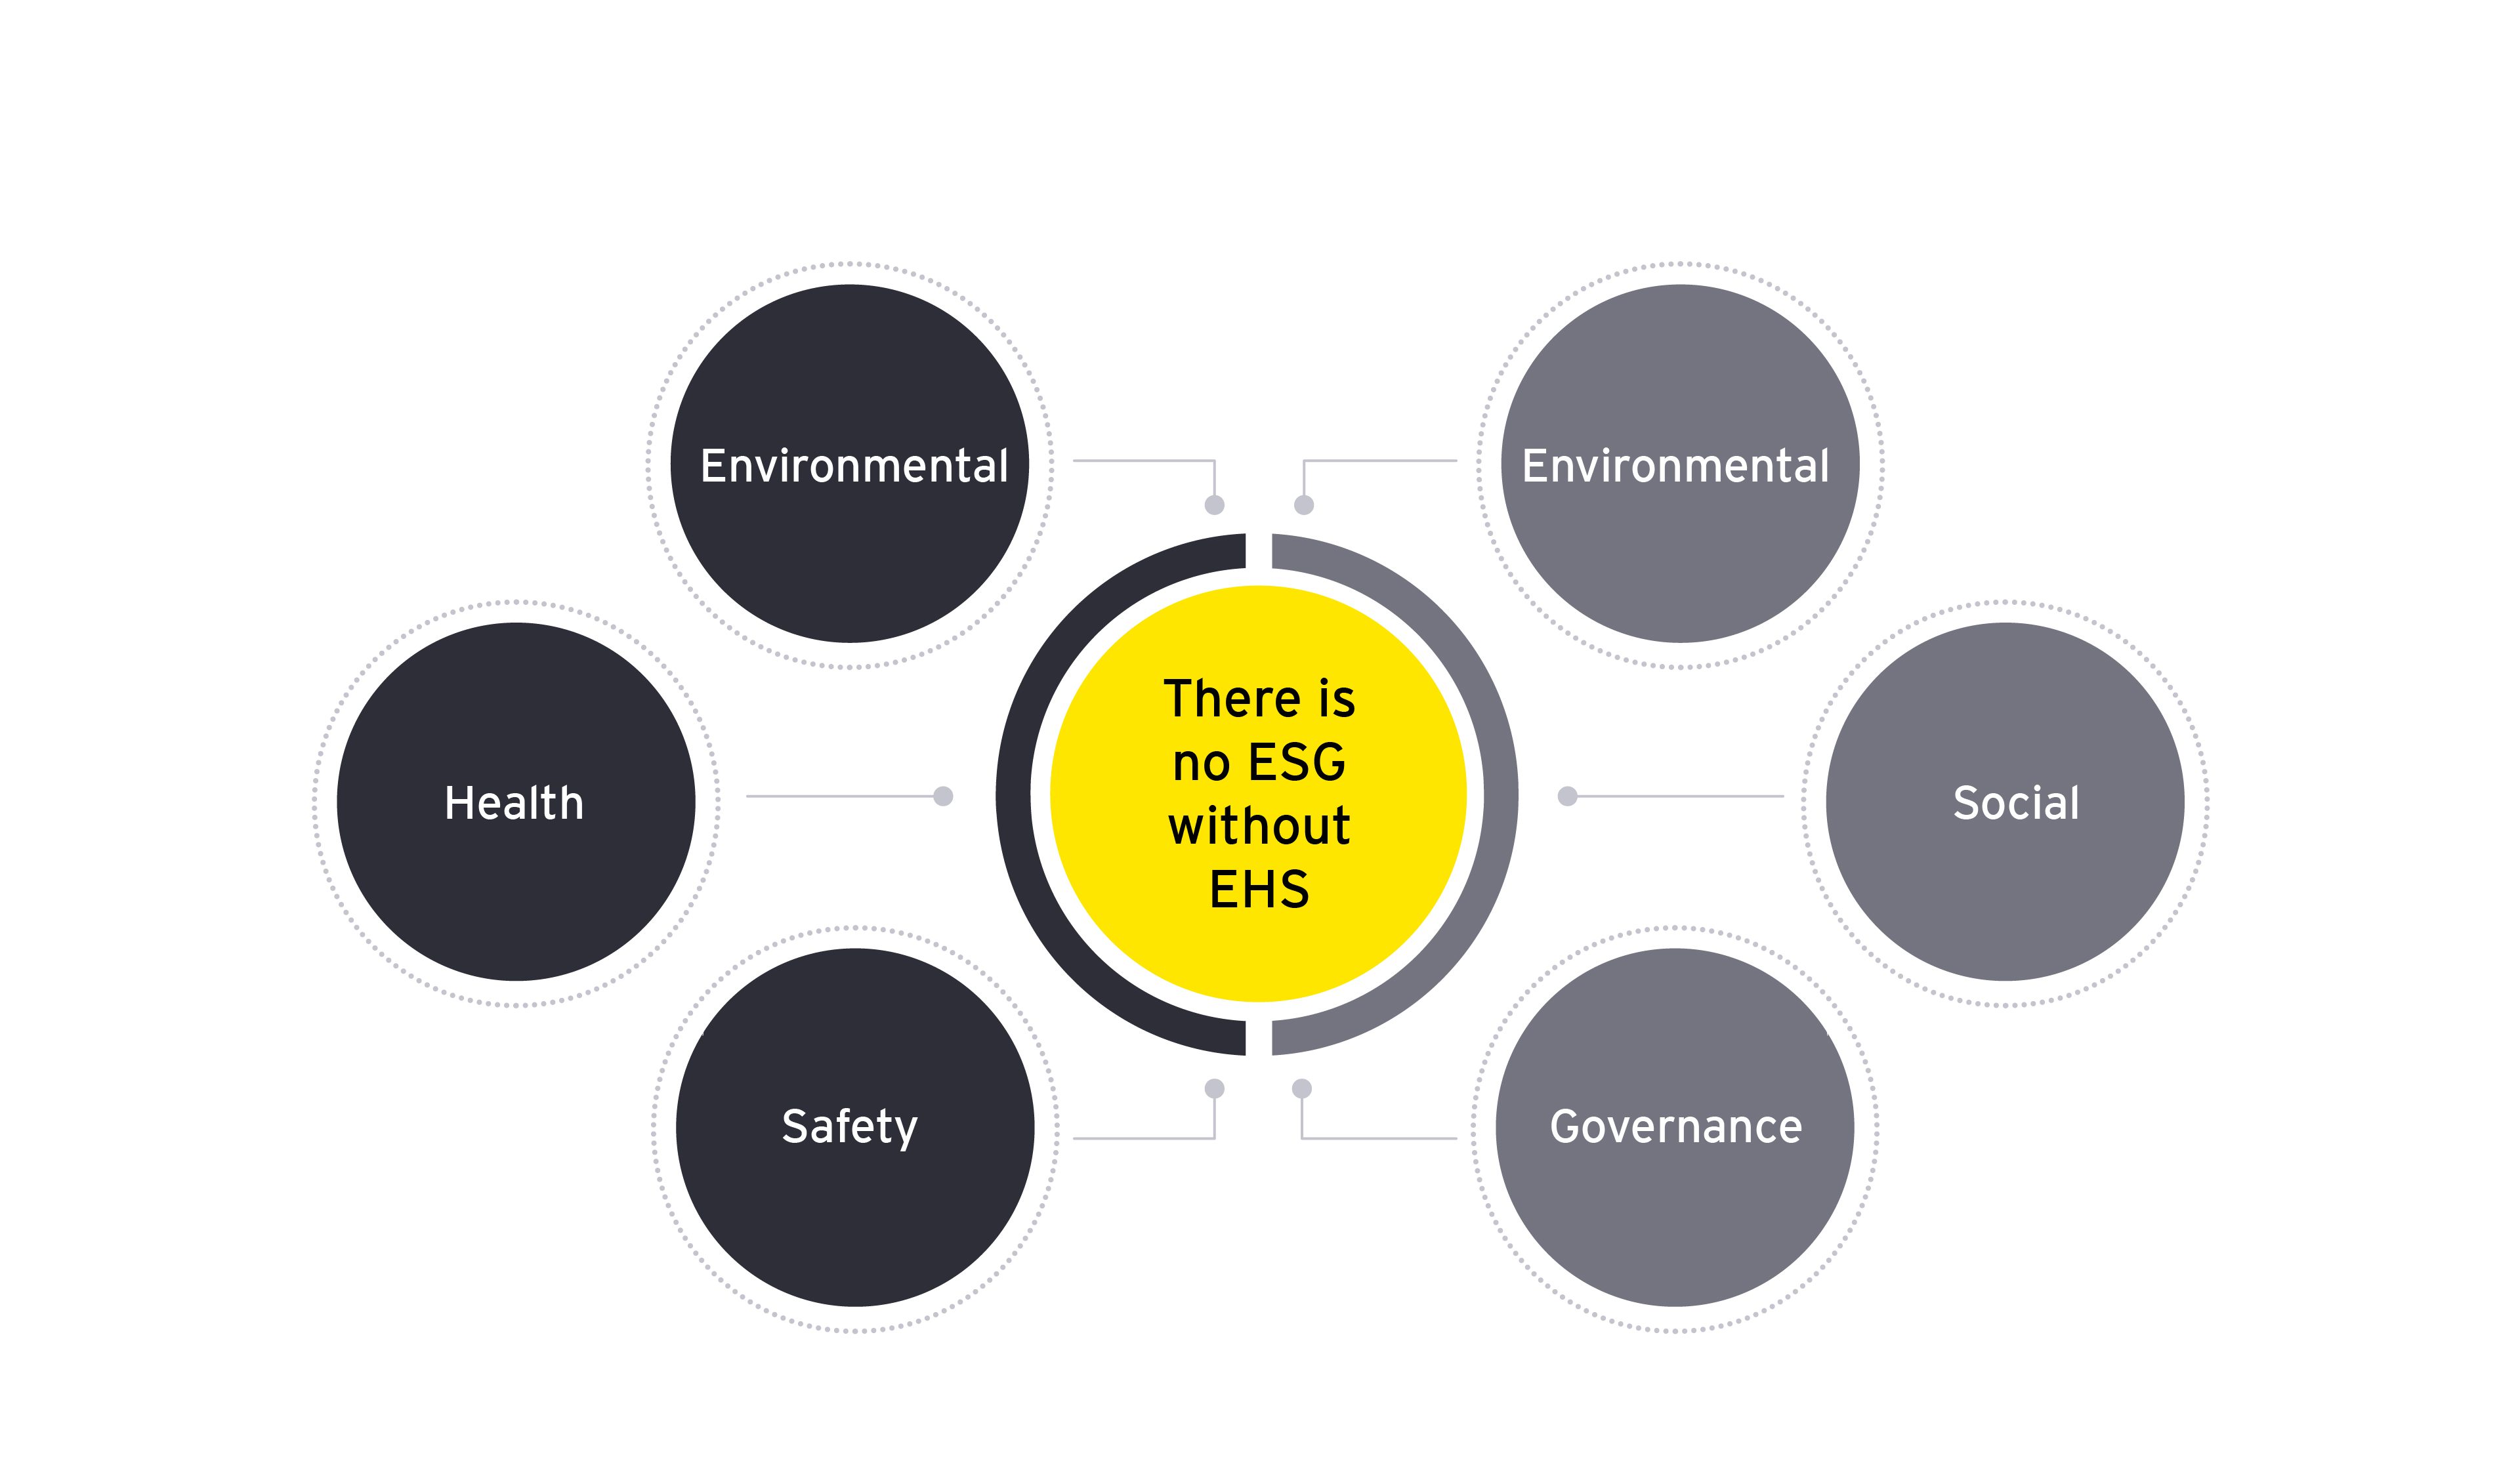 There is no ESG without EHS.